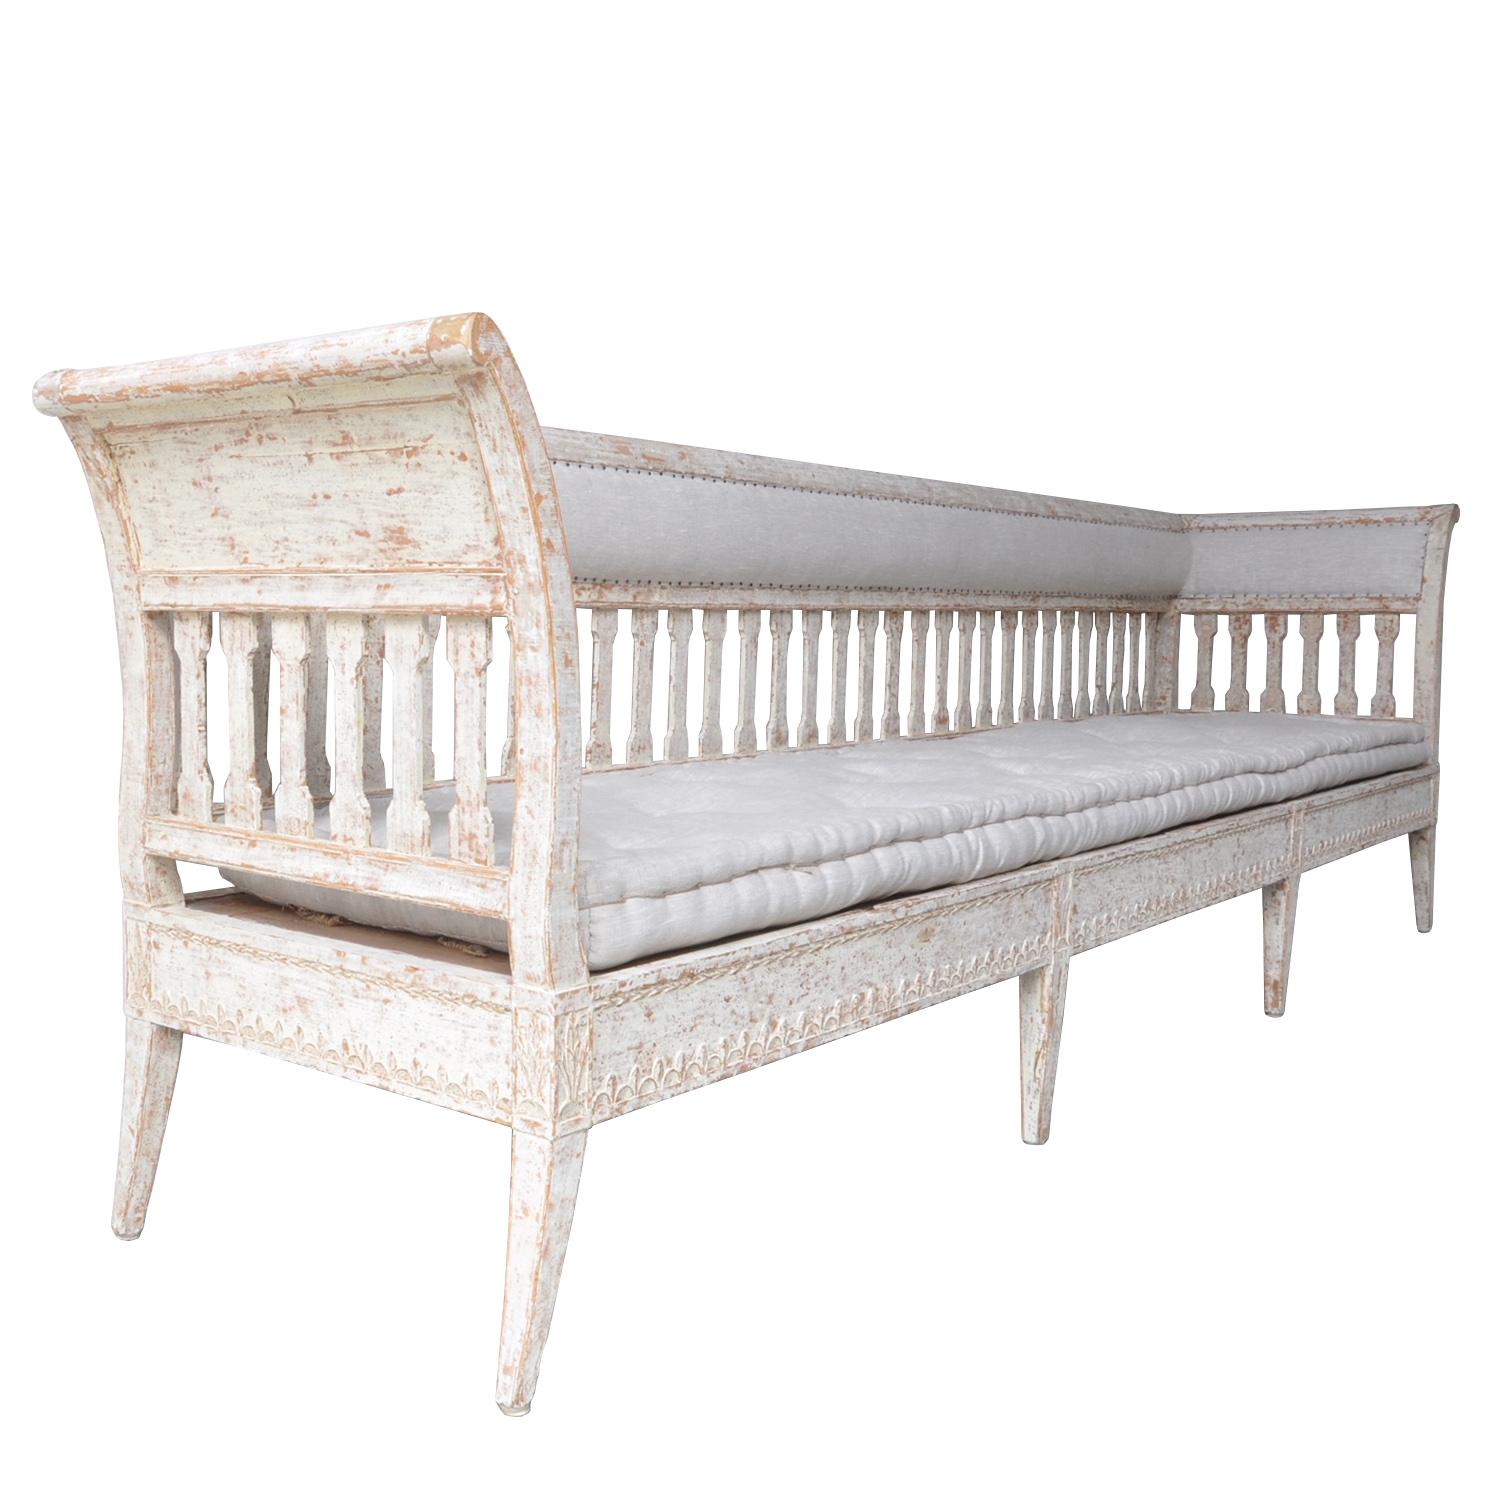 18th Century and Earlier Exception Period Gustavian Long Sofa in Original Paint